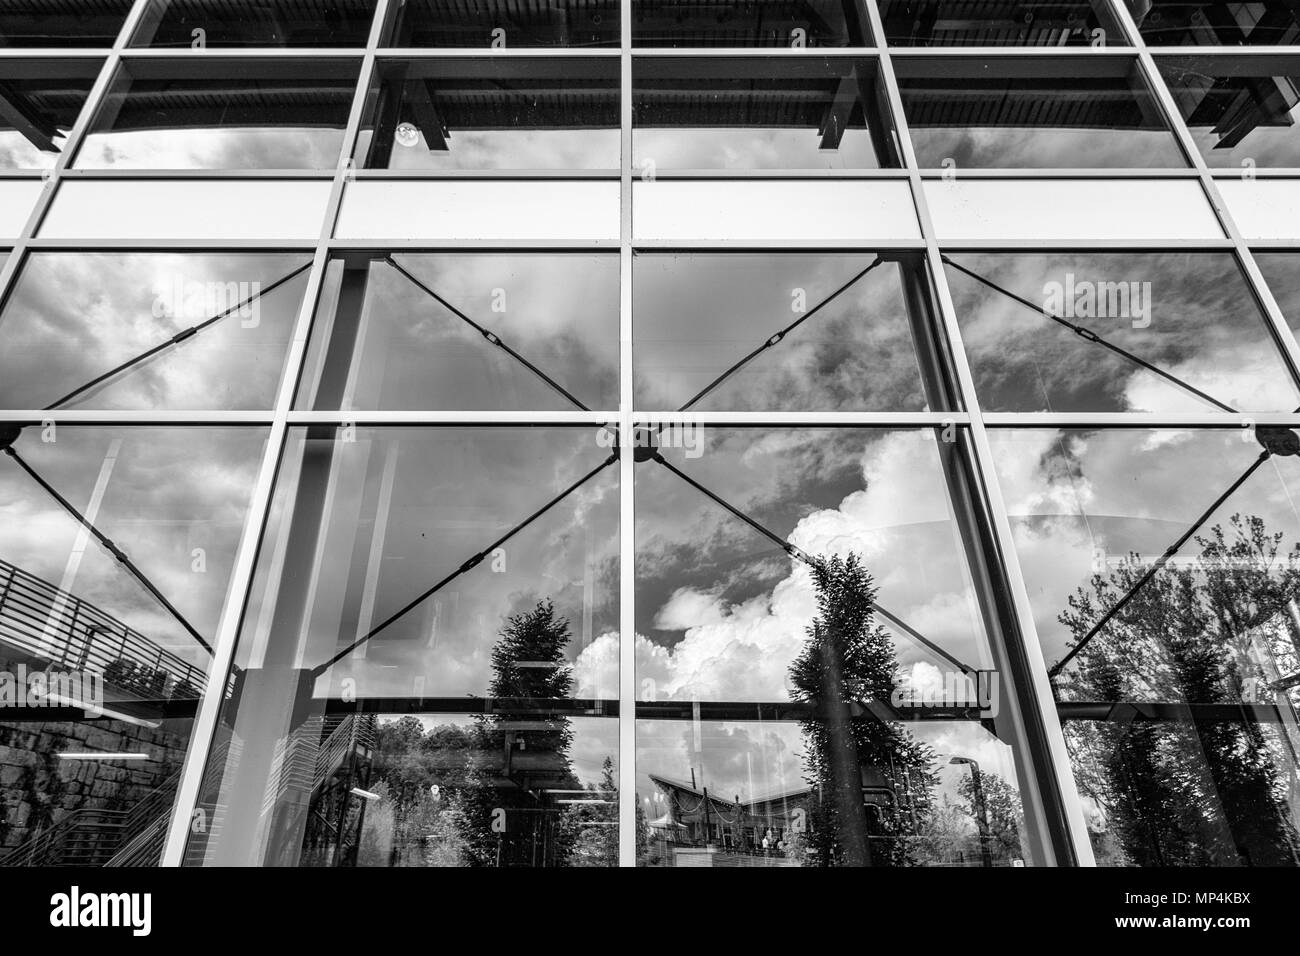 Reflection from the geometric windows reveal the tasting room and a dramatic sky at the New Belgium Brewing Company in Asheville, NC, USA Stock Photo